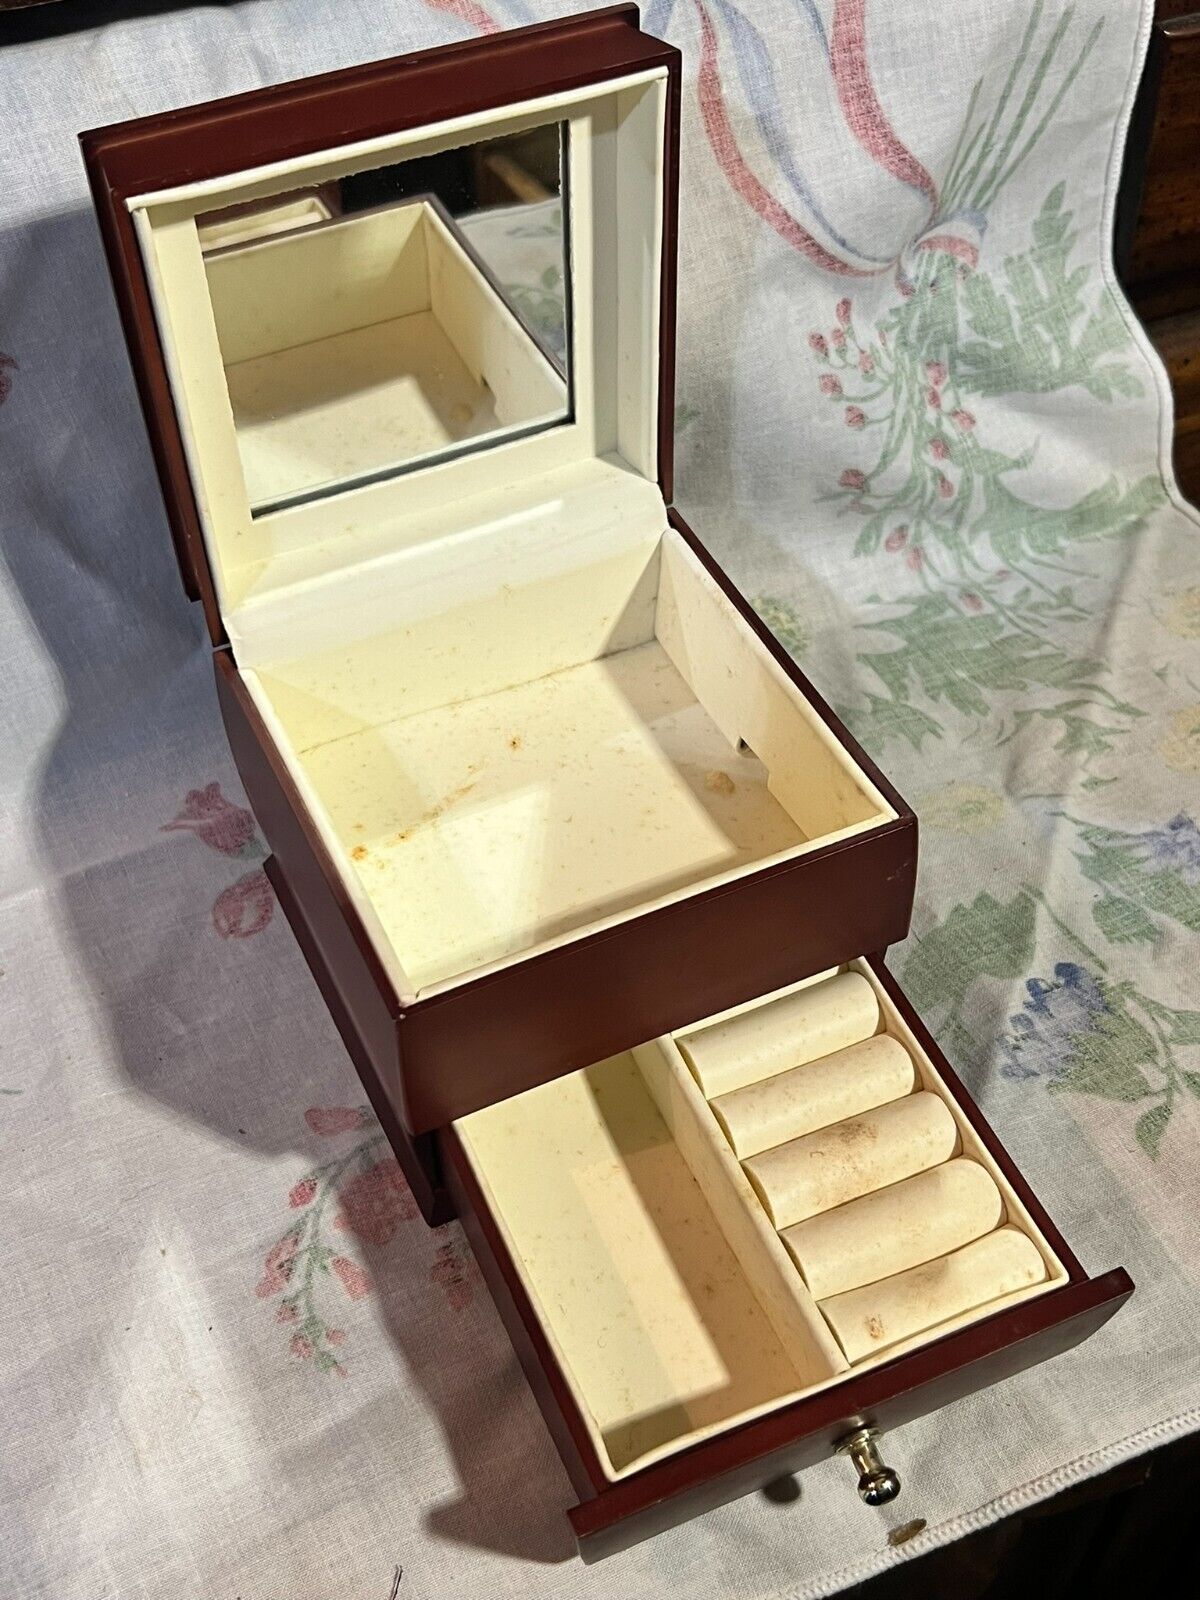 Small Wooden Jewelry Box W/Drawer And Lifting Lid White Interior Felt Bottom